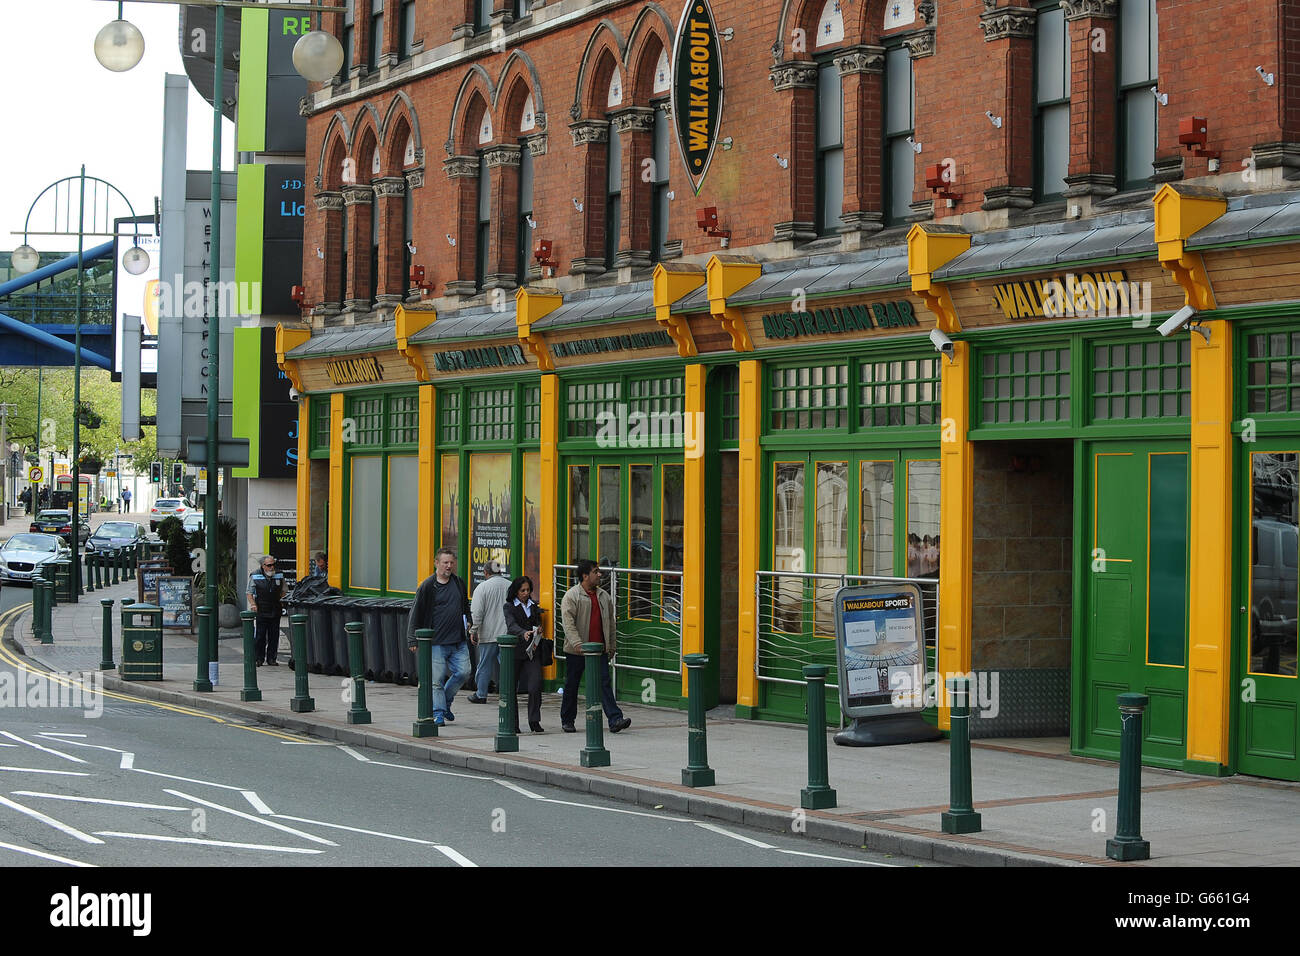 A general view of the Walkabout bar on Broad Street, Birmingham, where it is understood members of both the Australian and England cricket teams were at some point on Saturday night after England's 48-run victory over Australia in the Champions Trophy opening match at Edgbaston. Stock Photo